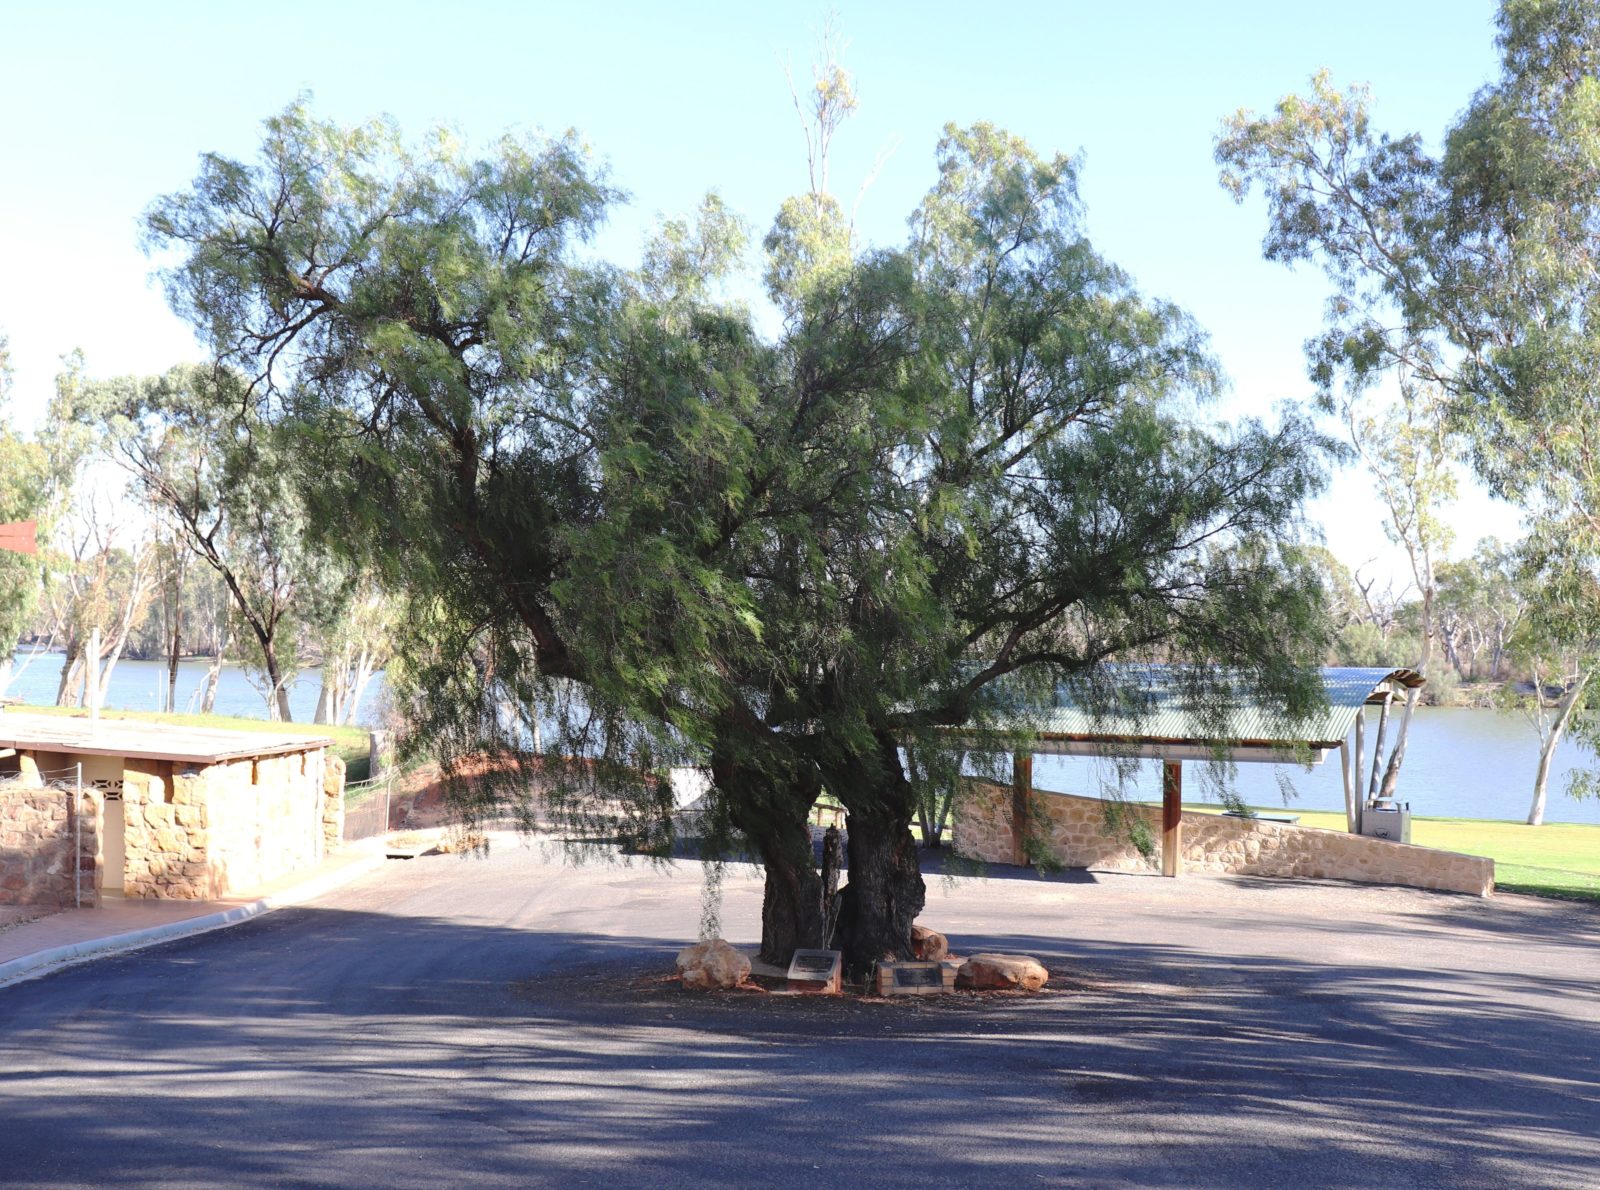 It is believed the tree stands at the site of William Loxton's Hut, which became the town of Loxton.